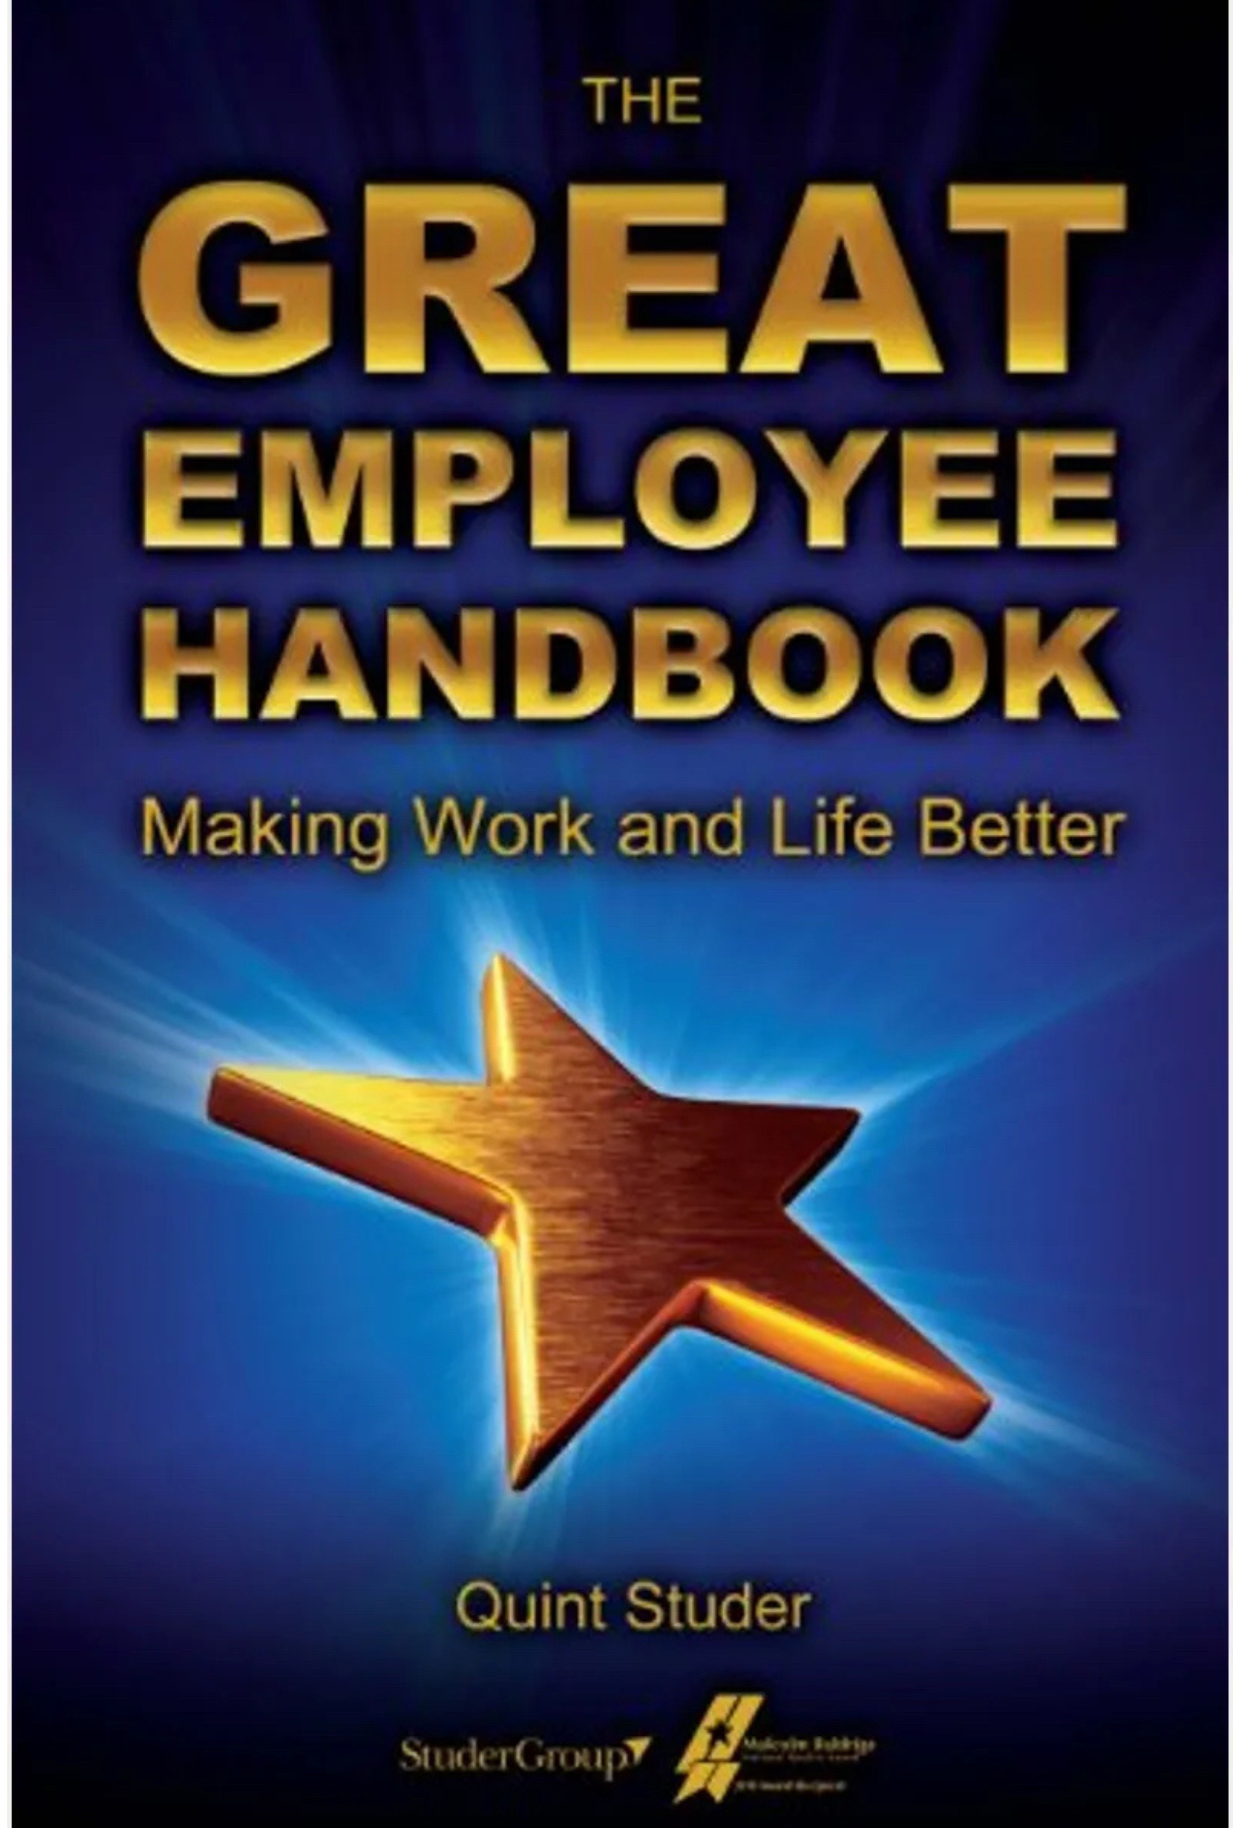 The Great Employee Handbook by Quint Studer